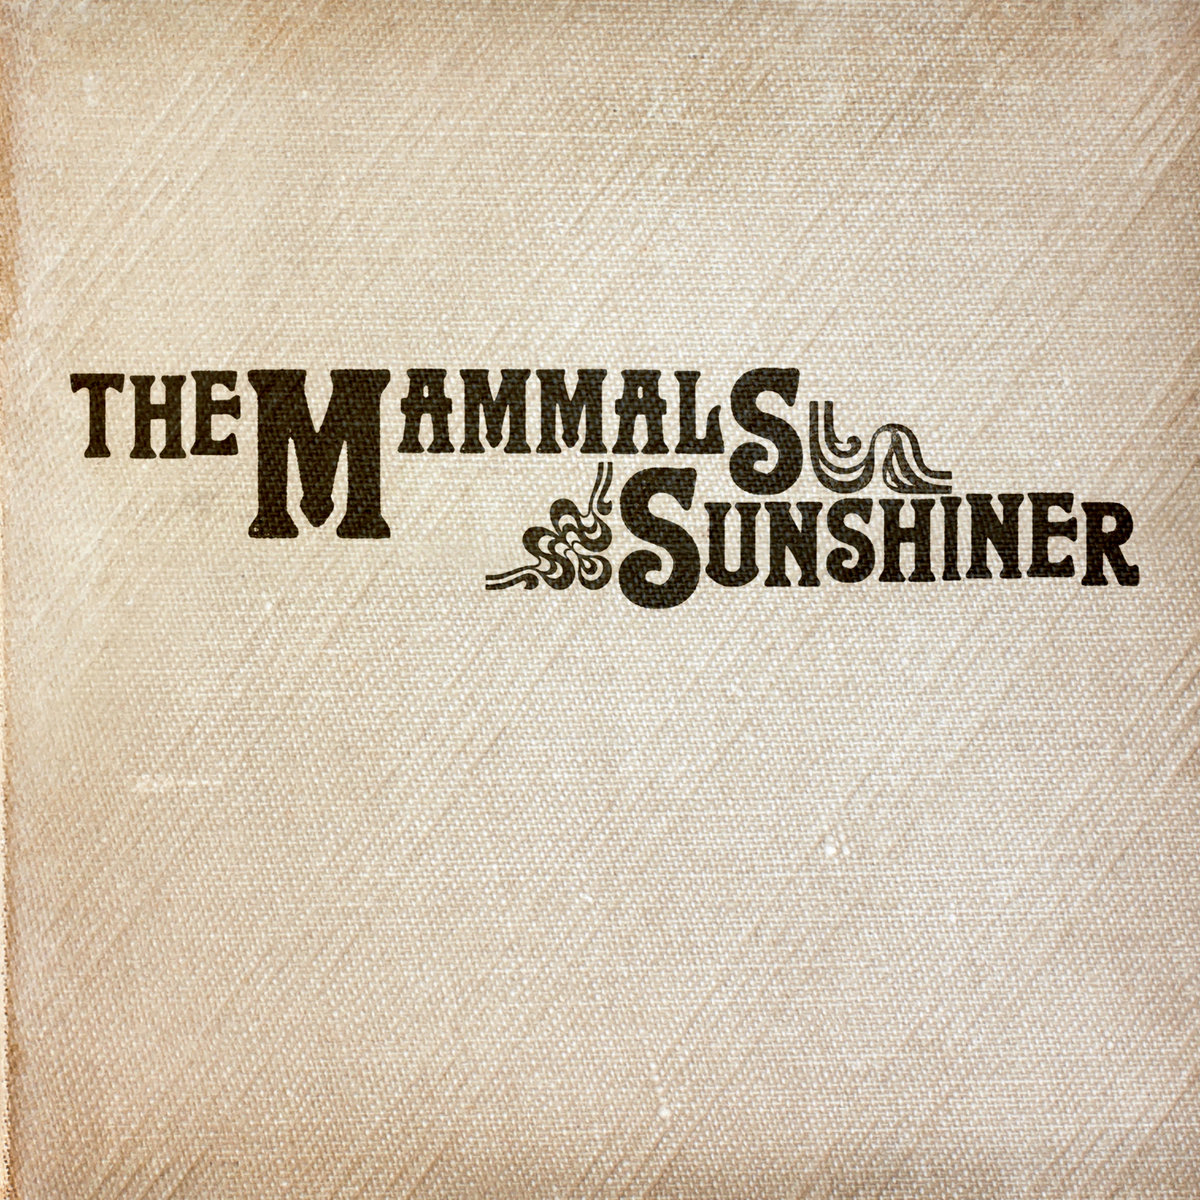 Image result for the mammals sunshiner